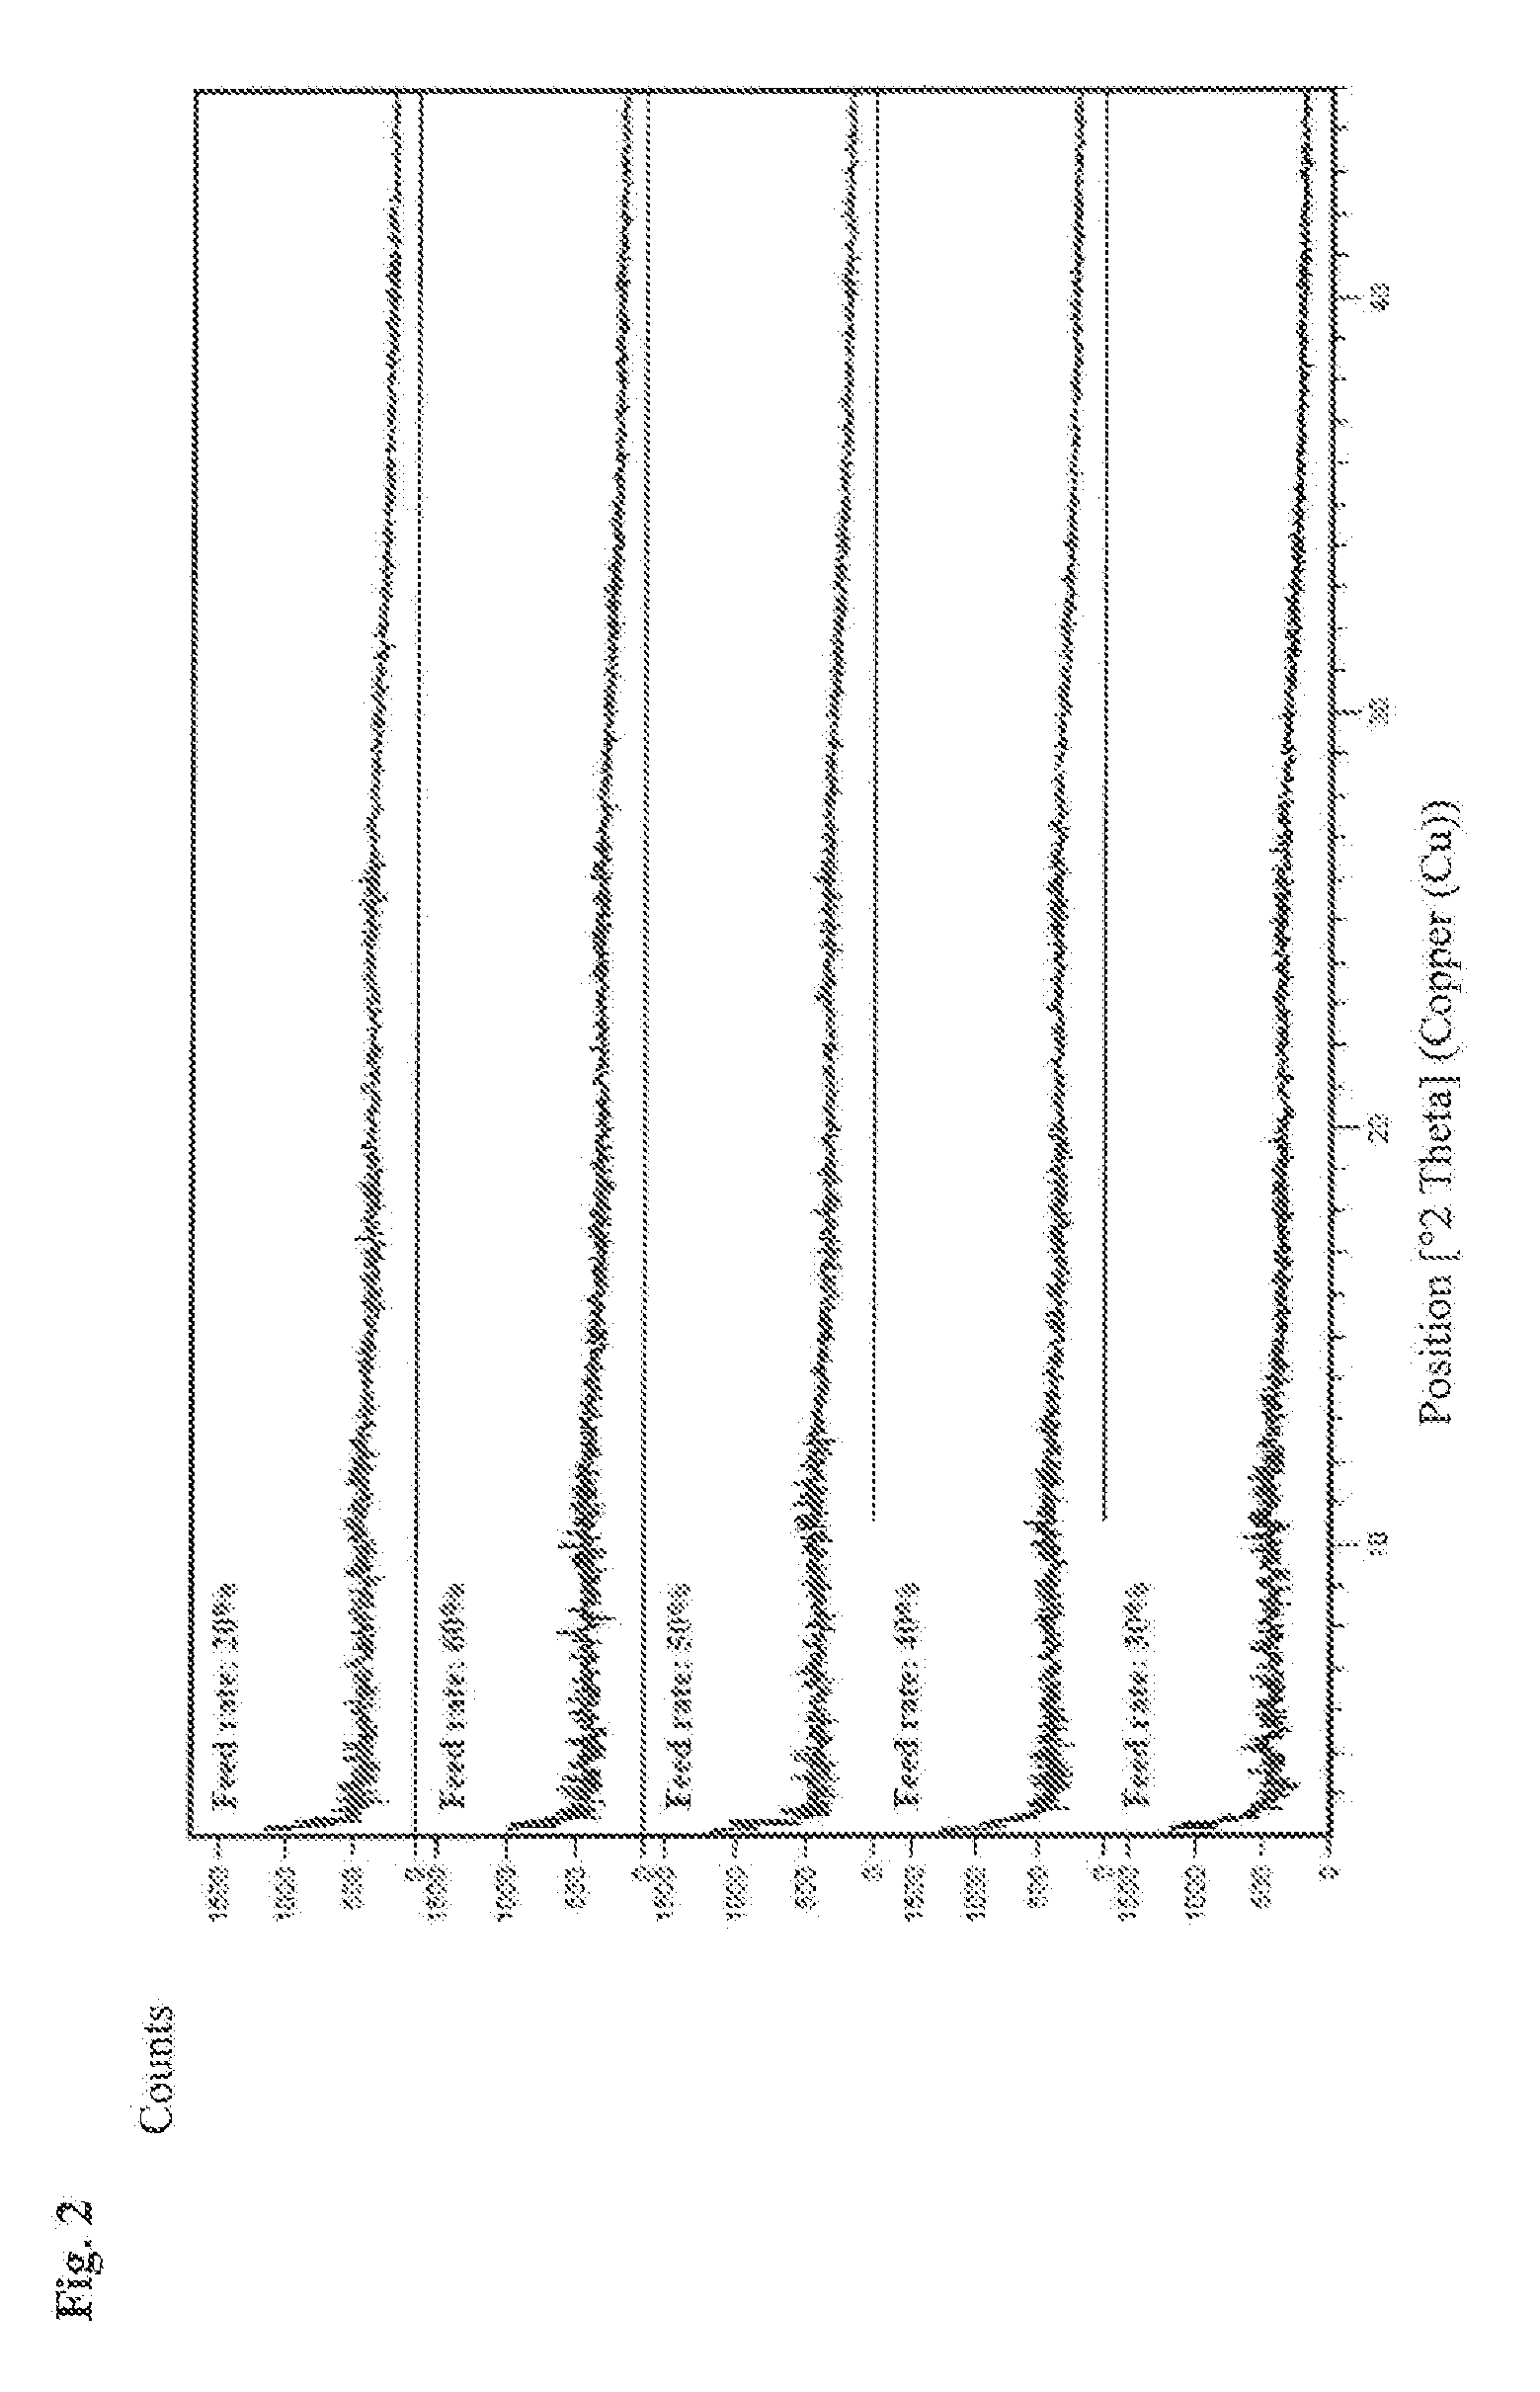 Calmangafodipir, a new chemical entity, and other mixed metal complexes, methods of preparation, compositions, and methods of treatment